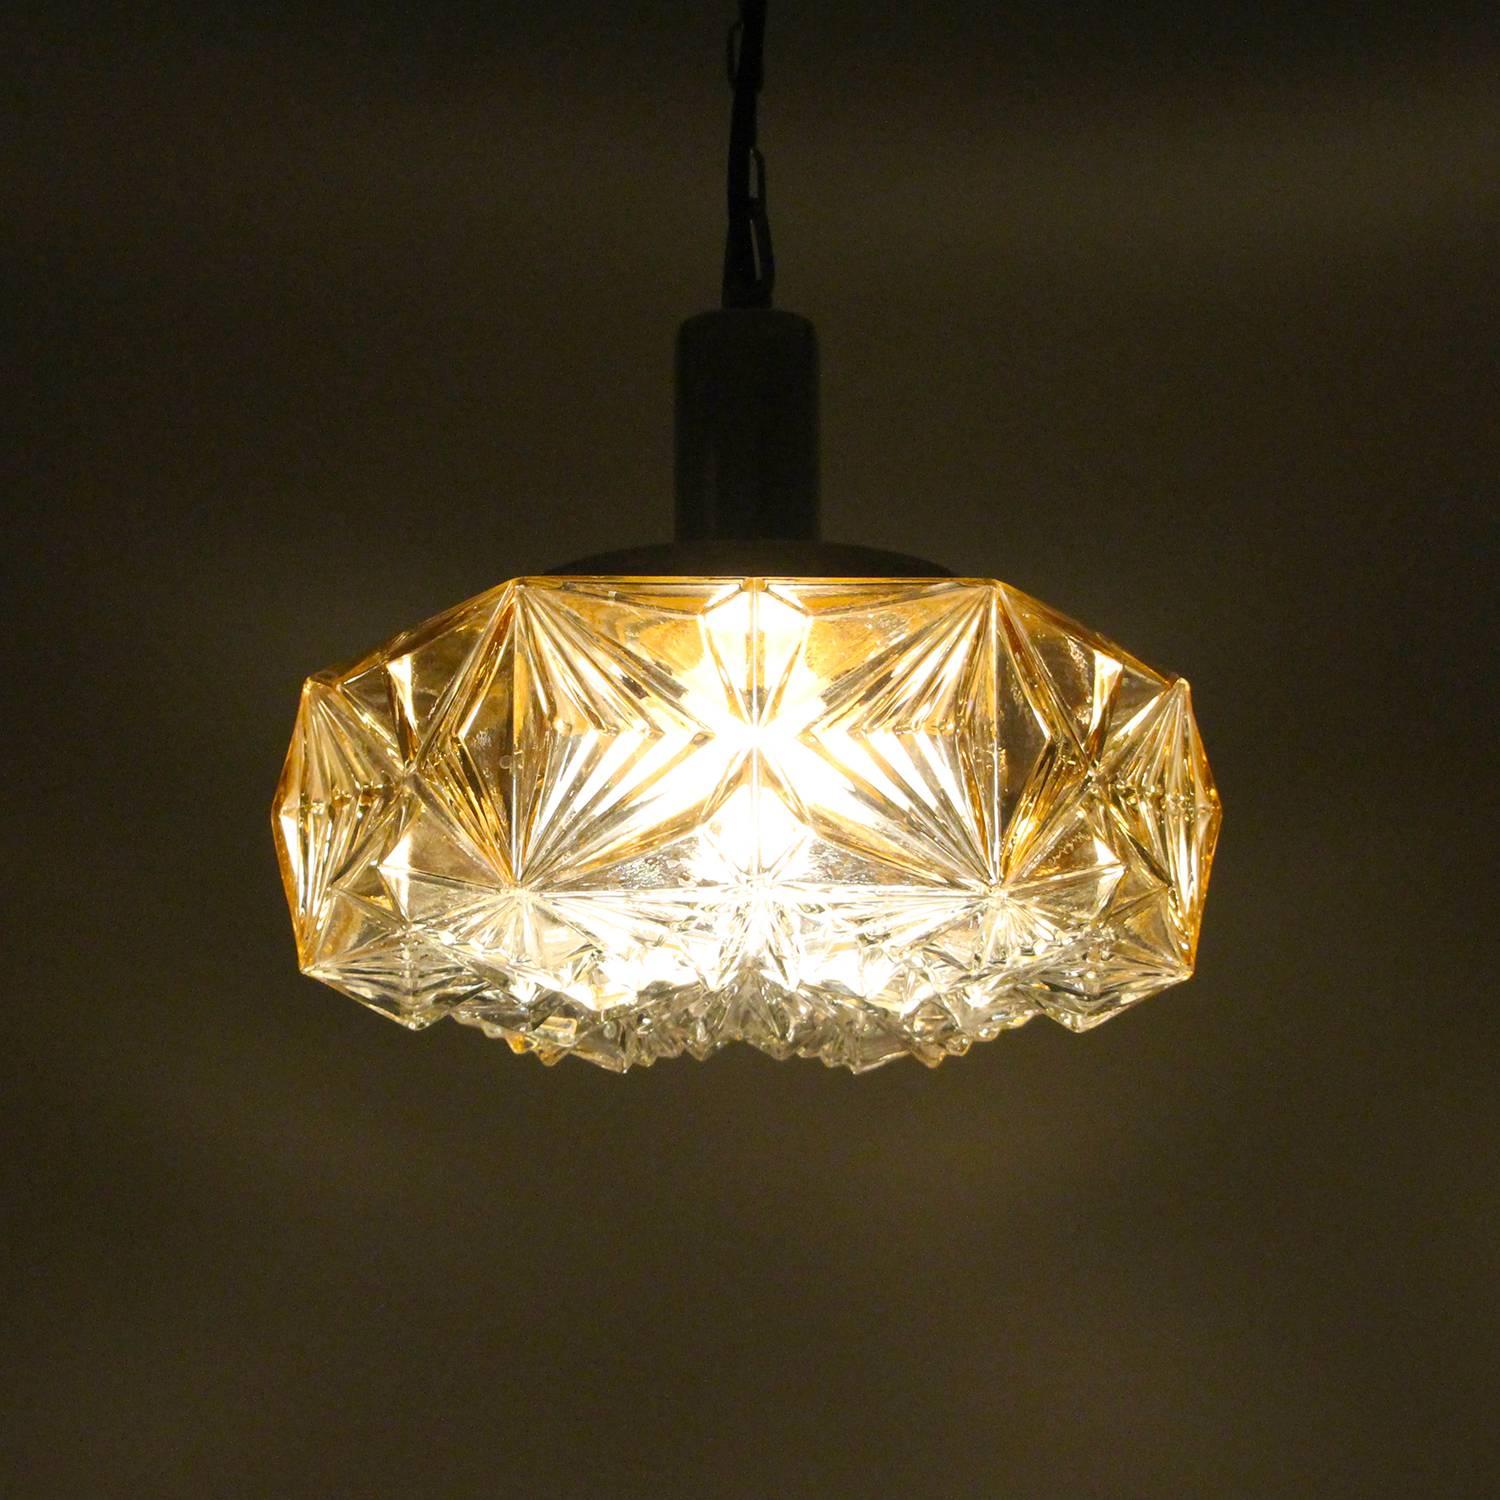 Danish Pressed Glass Pendant, No. 36404 by Vitrika, 1960s, Vintage Glass and Brass Lamp